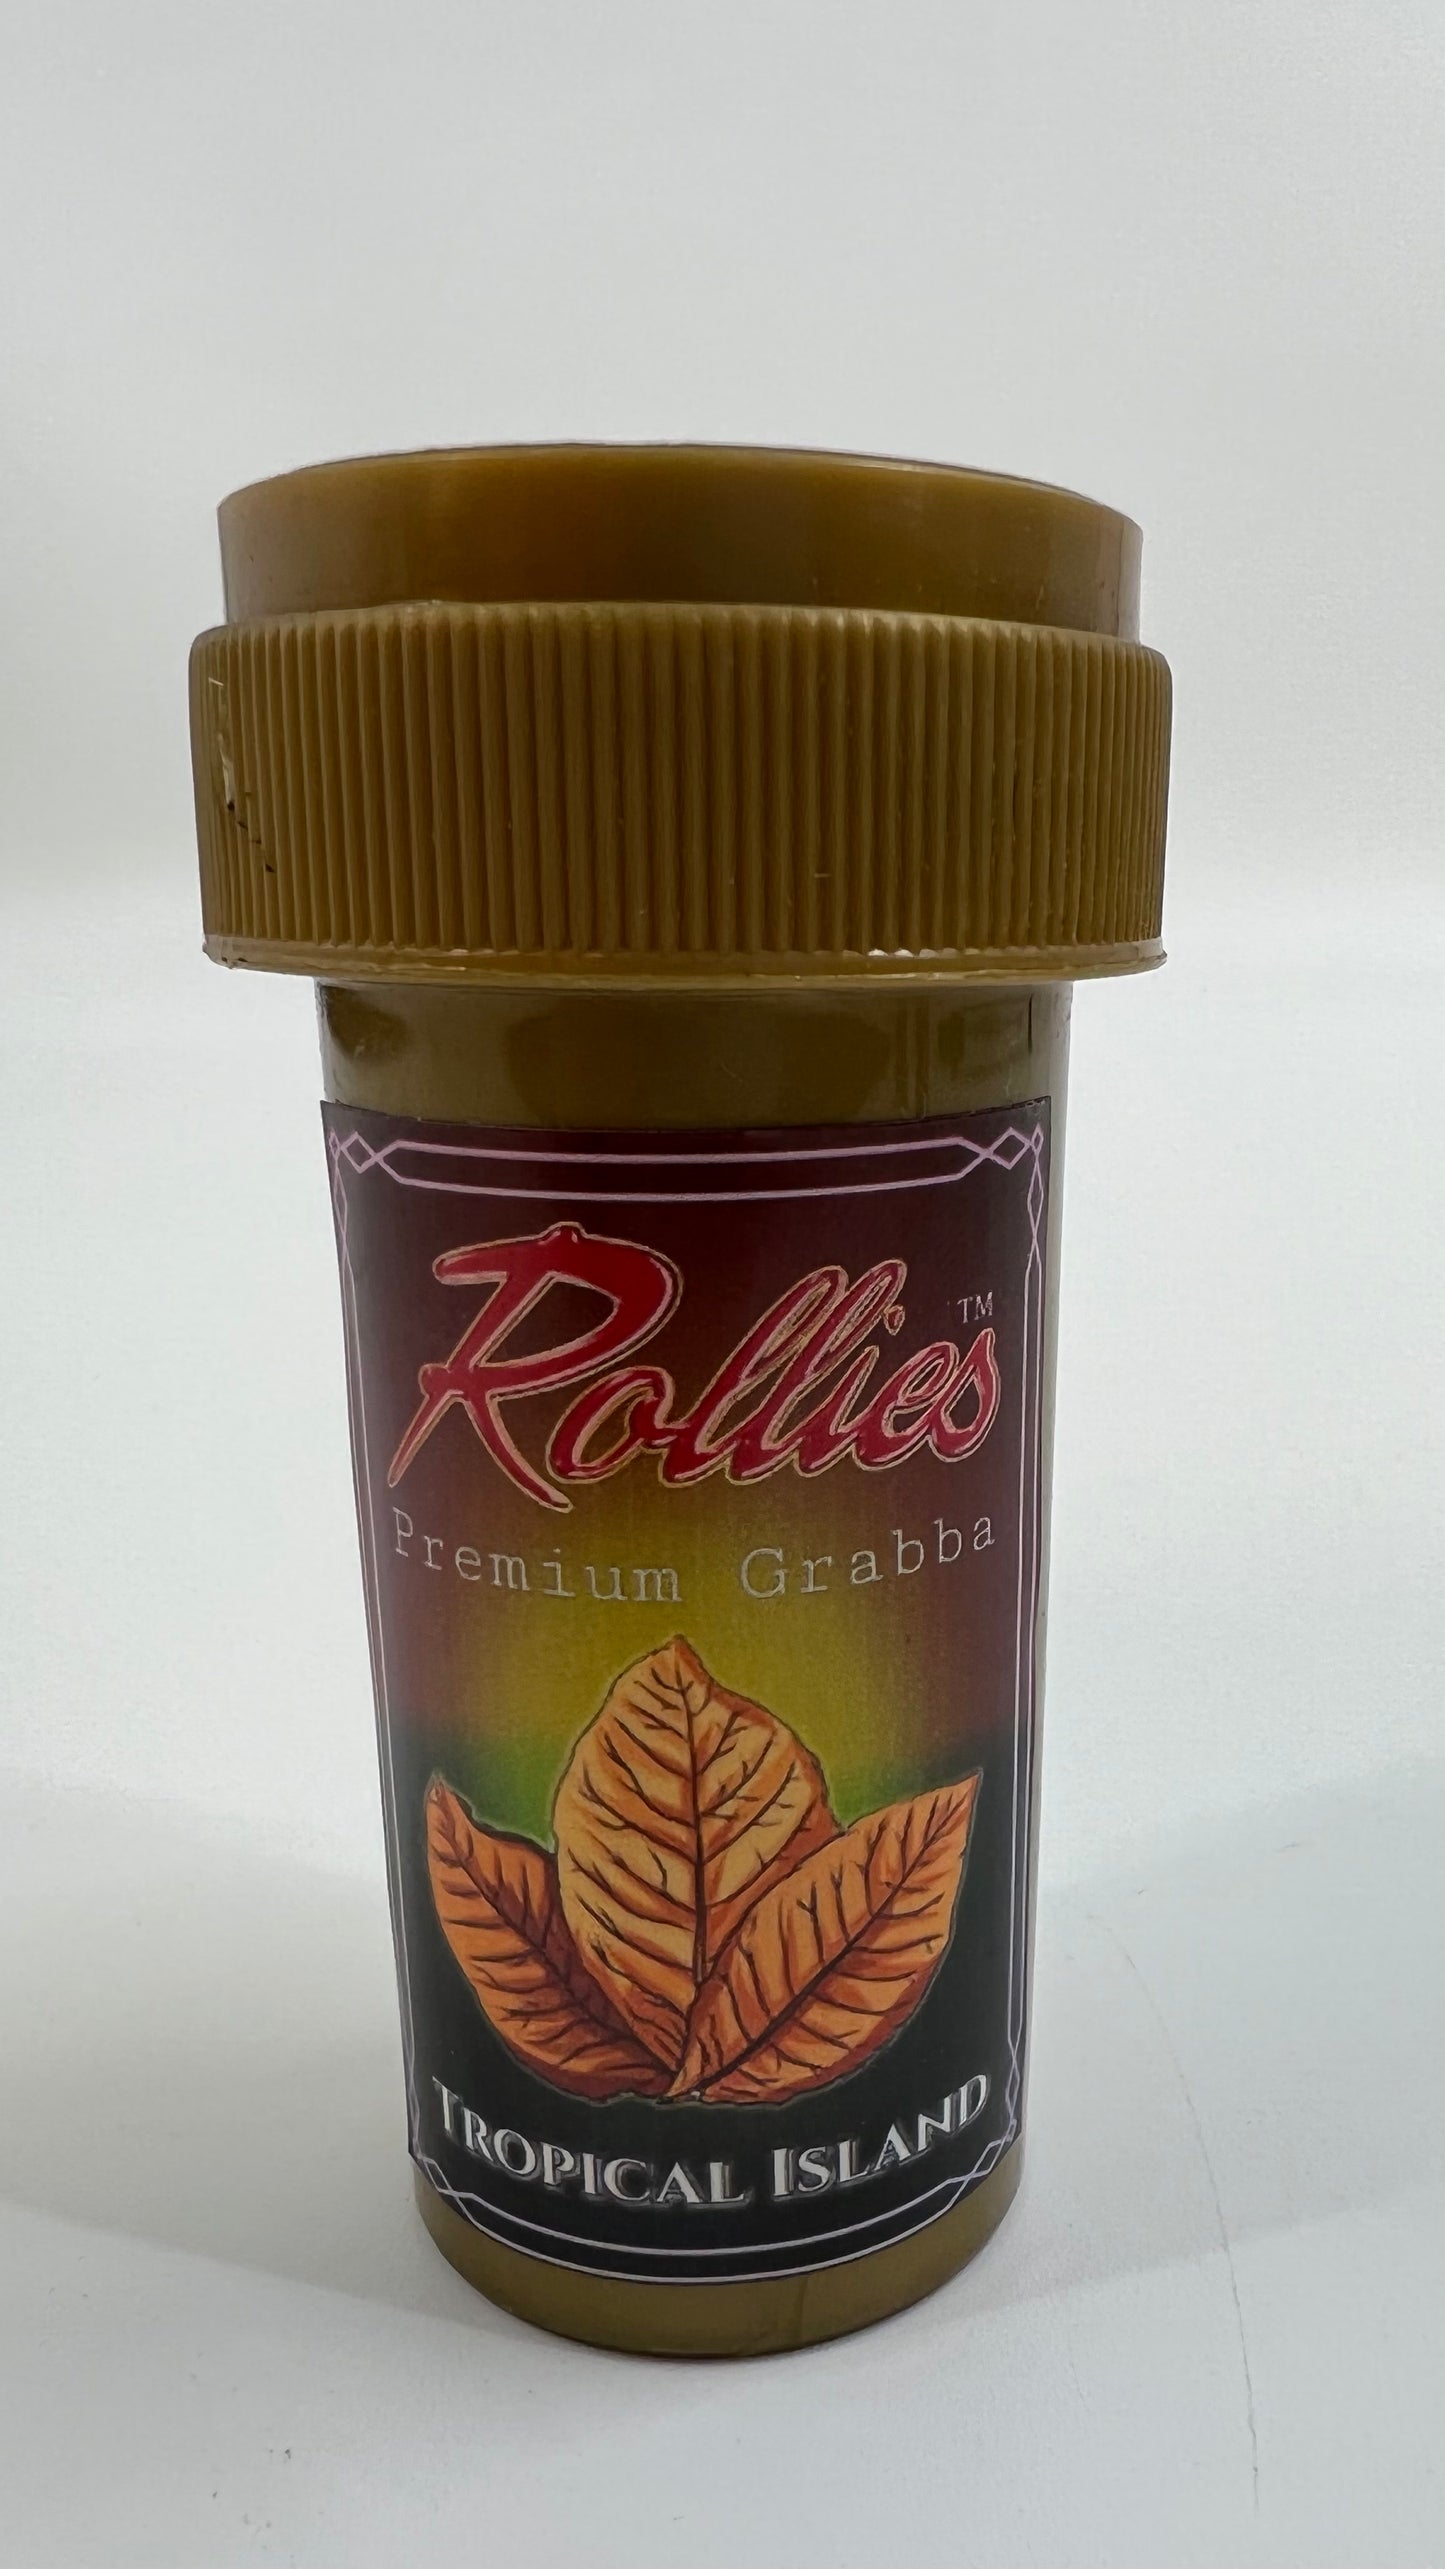 Rollies Grabba 100% Natural Premium Crushed Fronto Leaf